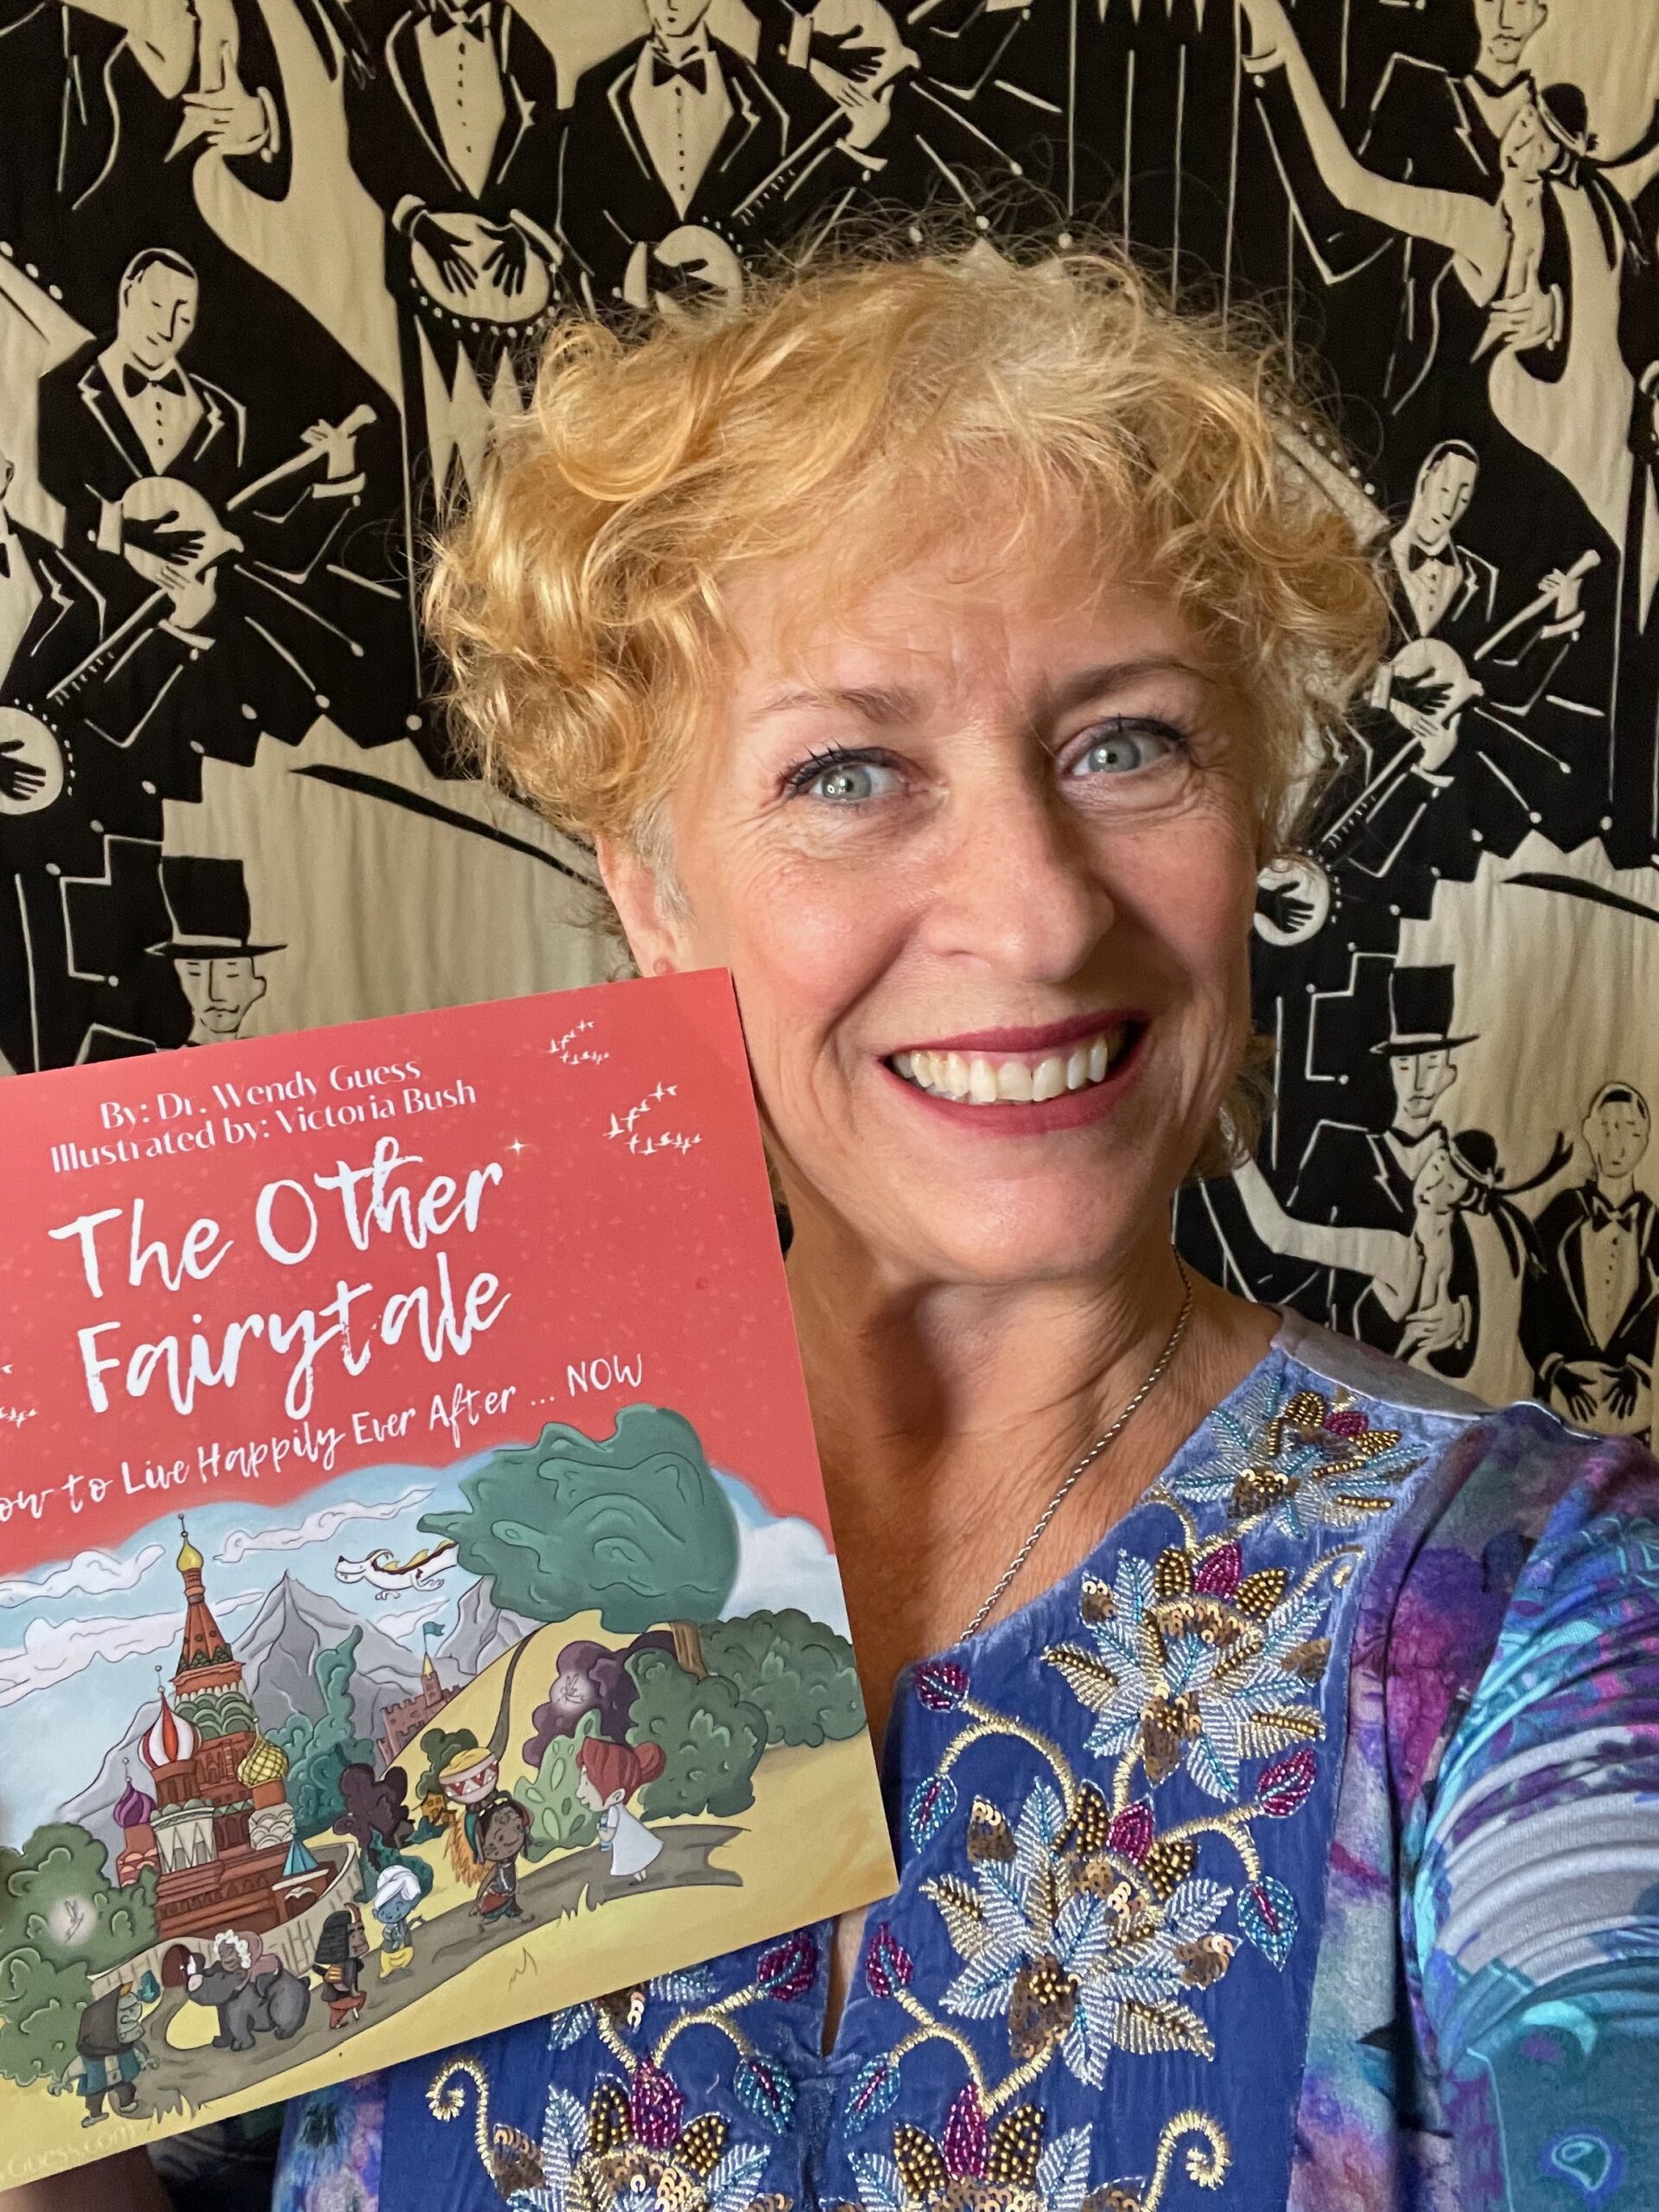 author holding book - The Other Fairytale